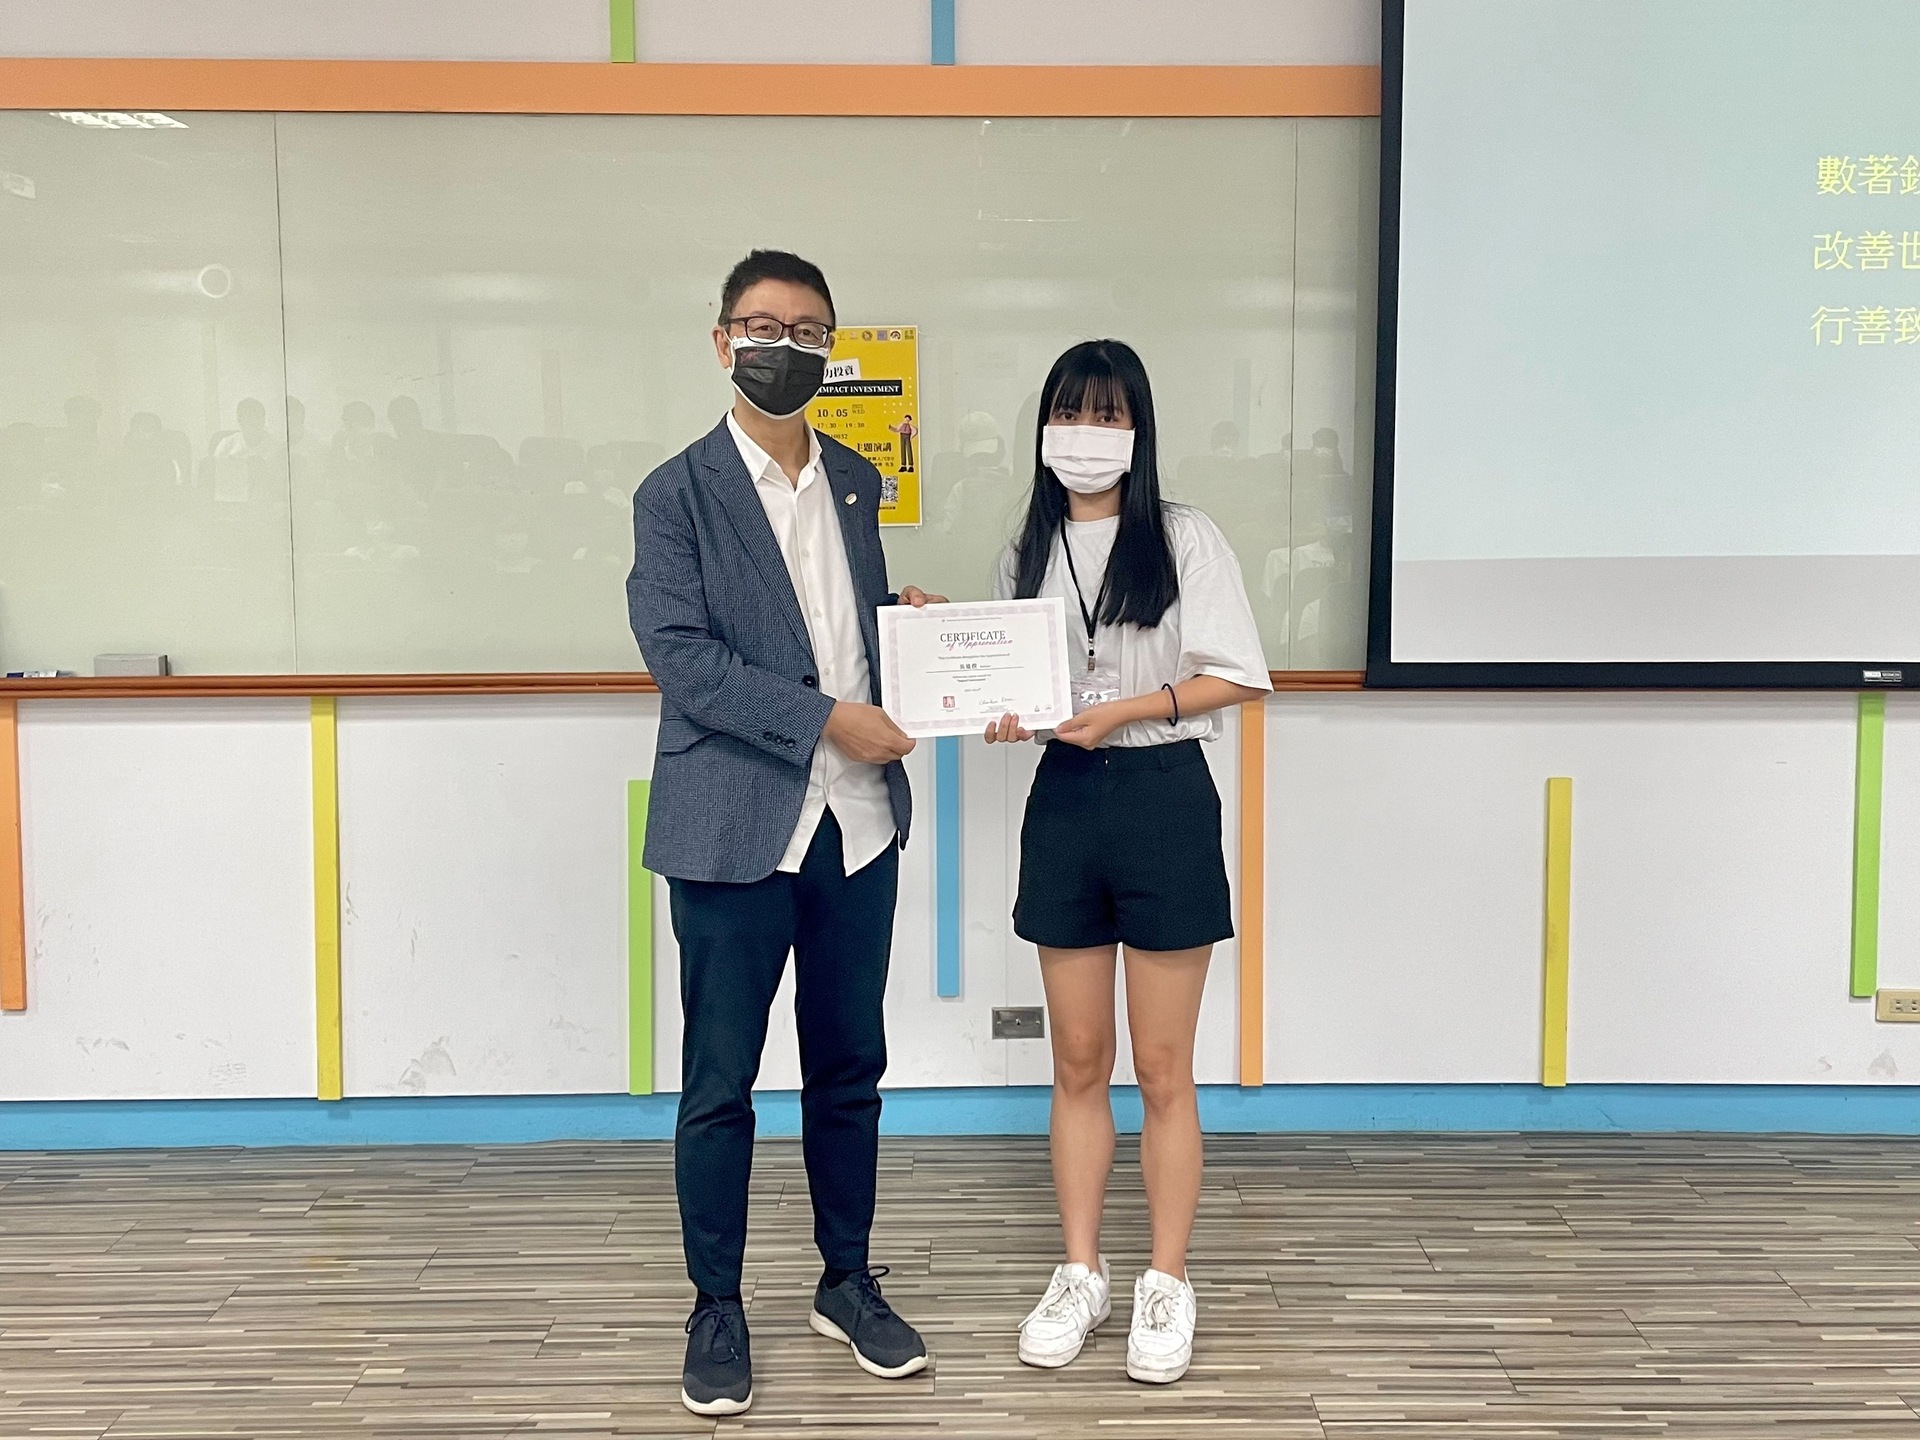 Campus director, I-Ting Wu, gave a certificate of appreciation to the lecturer, Dao K. Wu.